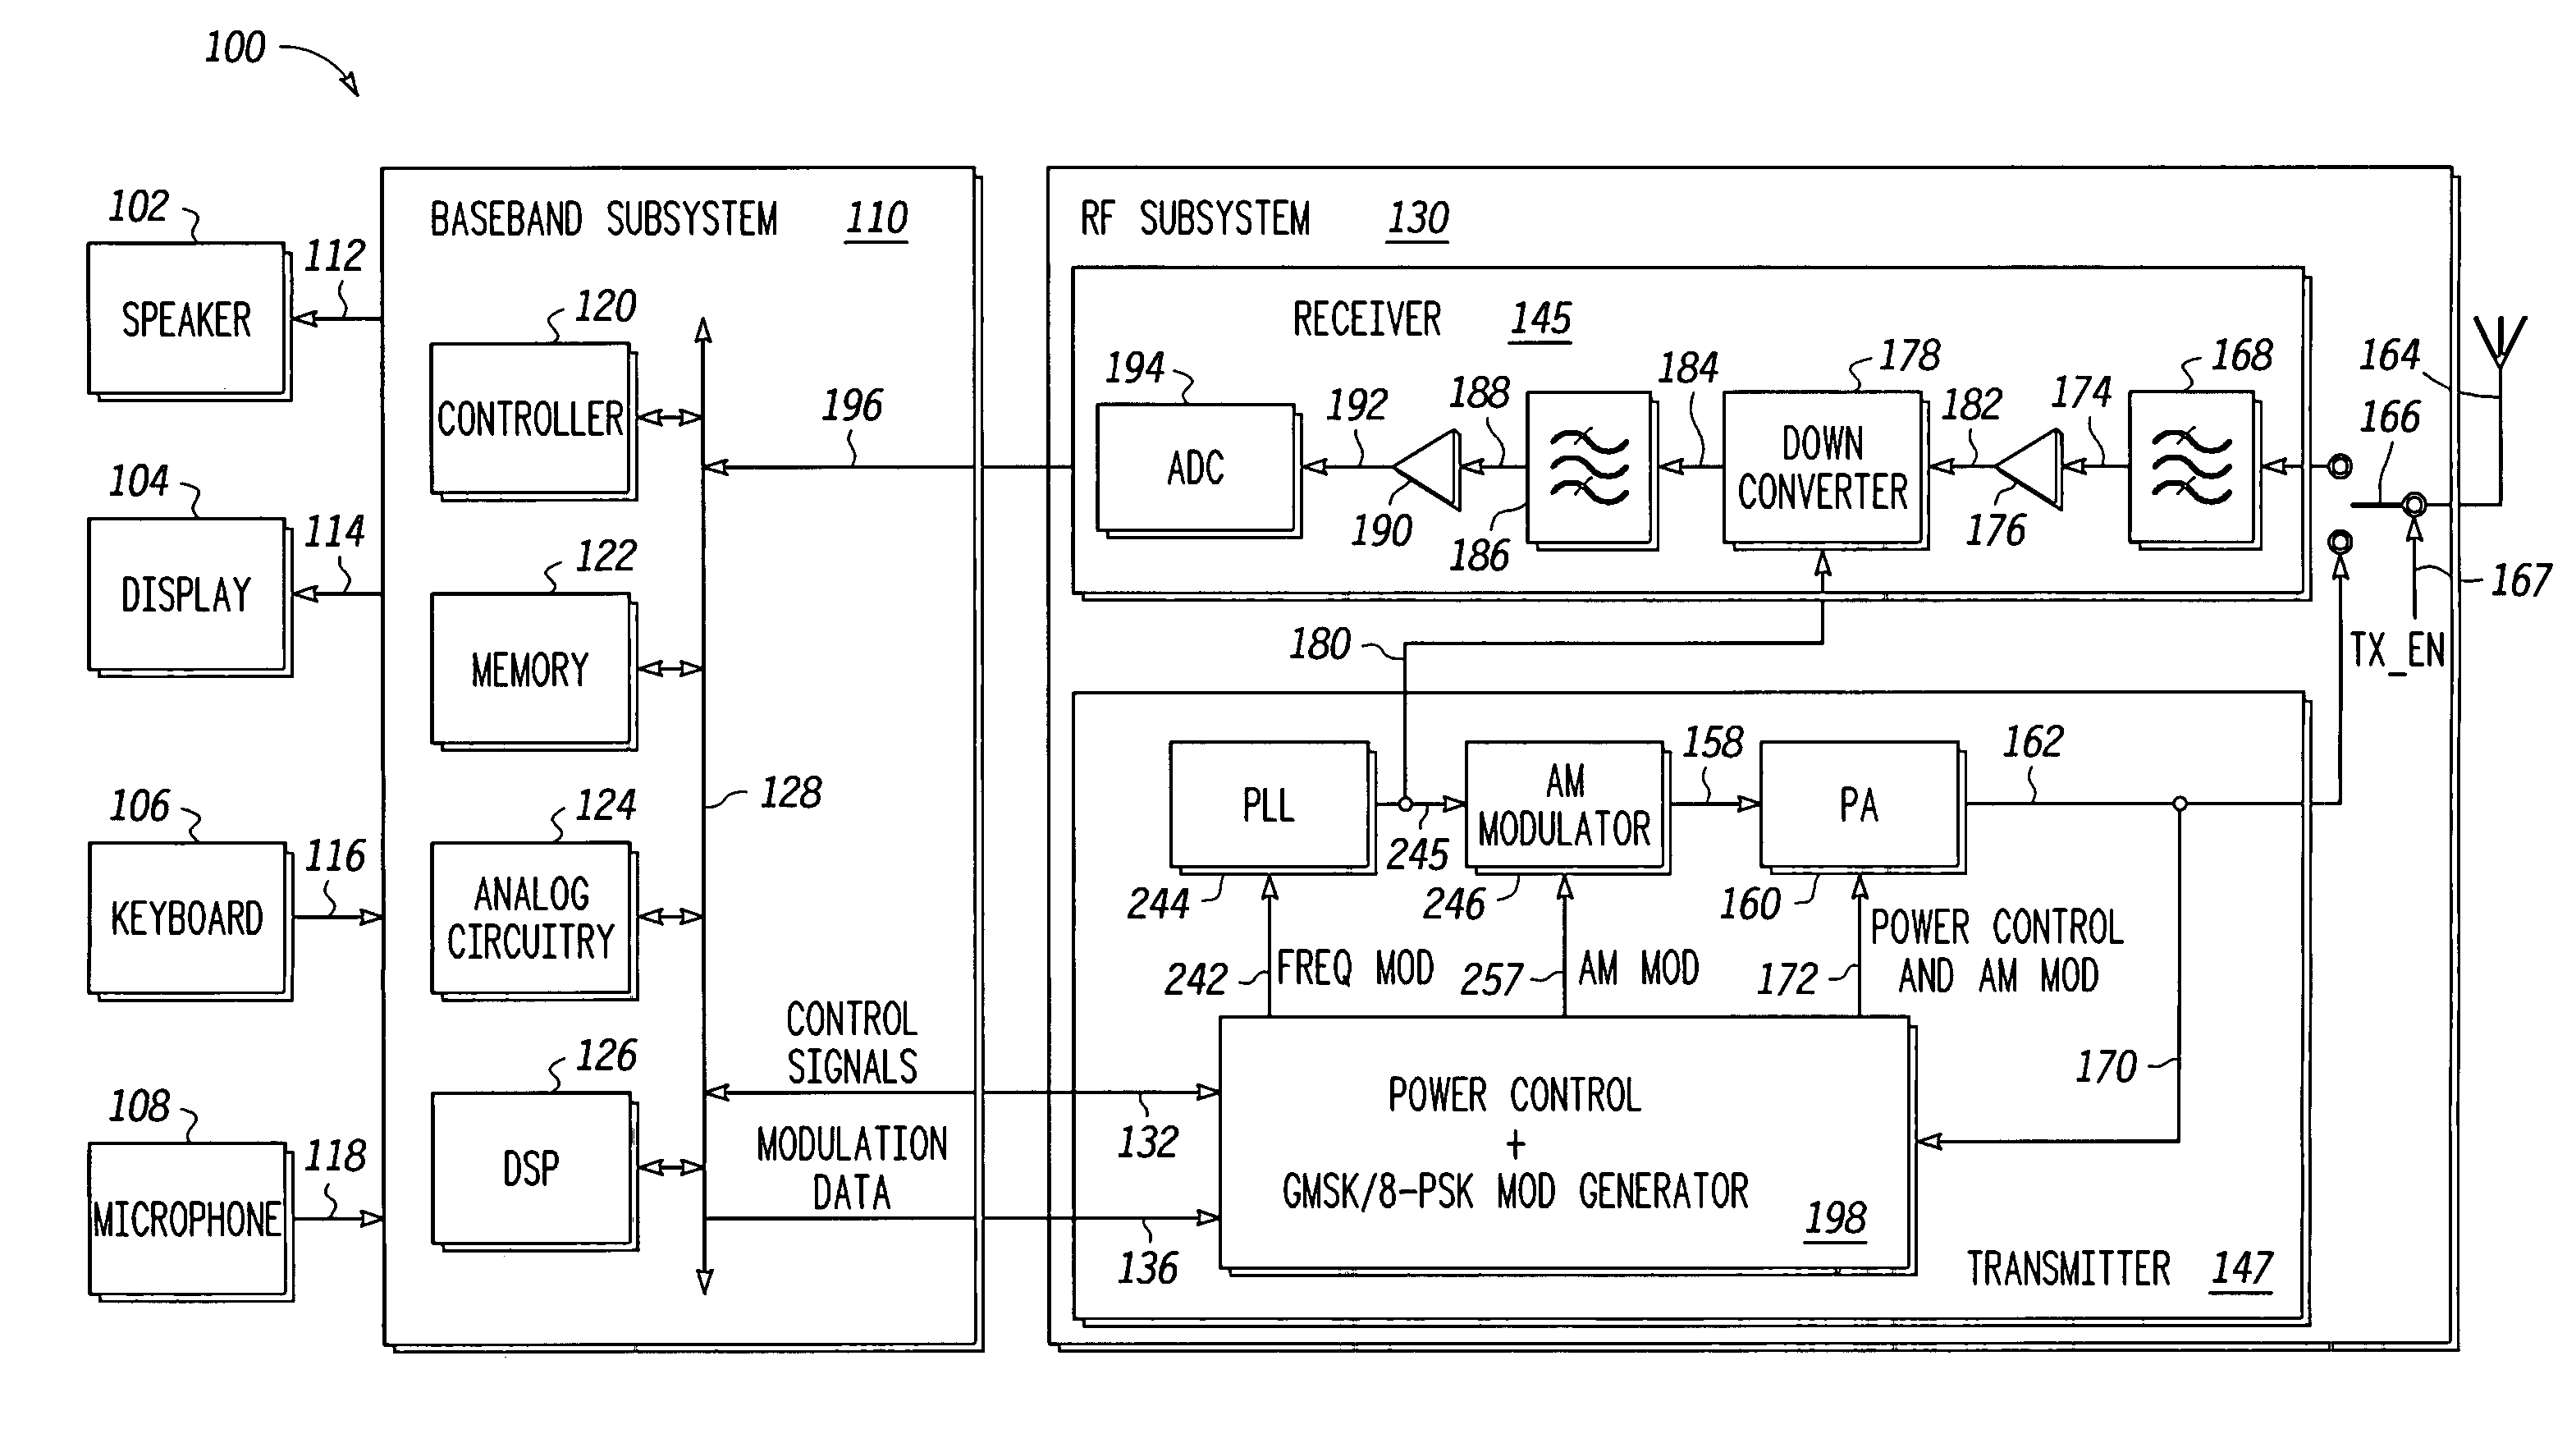 Configurable multi-mode modulation system and transmitter